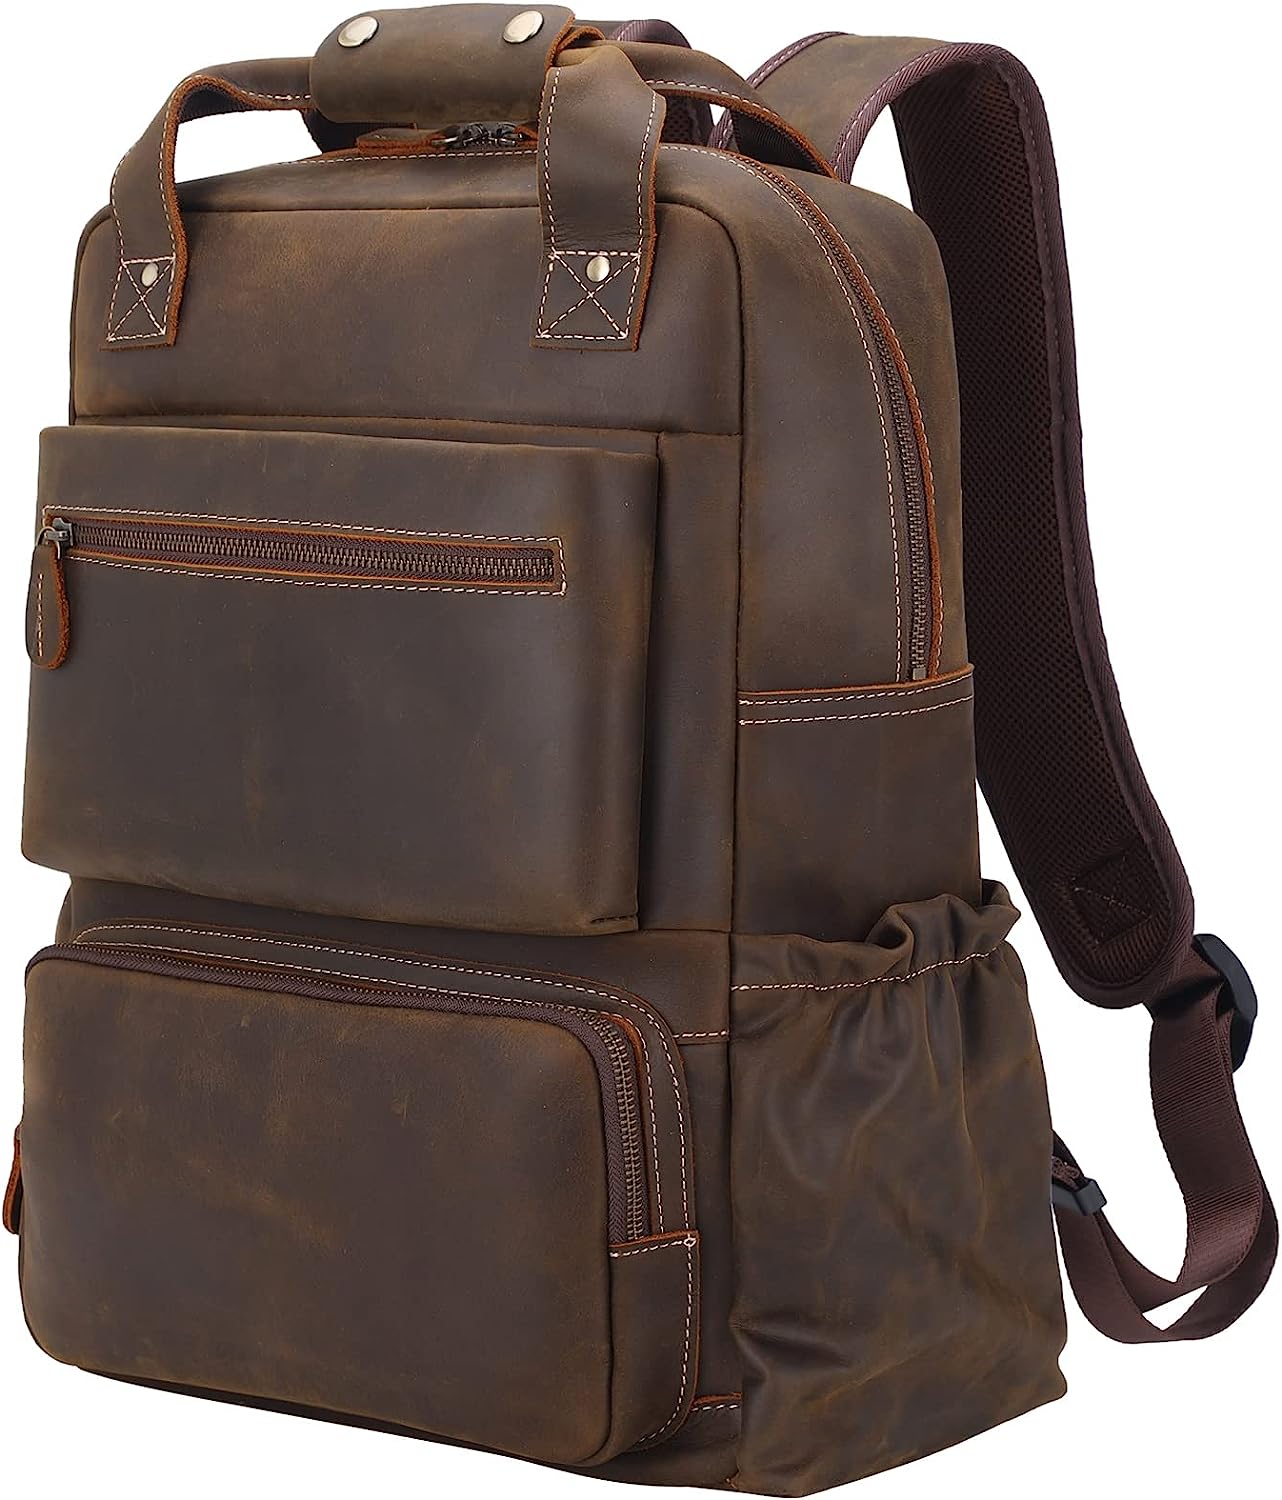 The TIDING Genuine Leather Backpack for Men offers durability, functionality, and stylets. Its robust construction, comfortable shoulder strap, and ample storage s make it a reliable companion for various activities and occasions. Although it may be slightly heavier and has limitations on laptop size compatibility, its overall quality and design make it a recommended choice for those searching for a versatile and long-lasting backpack.